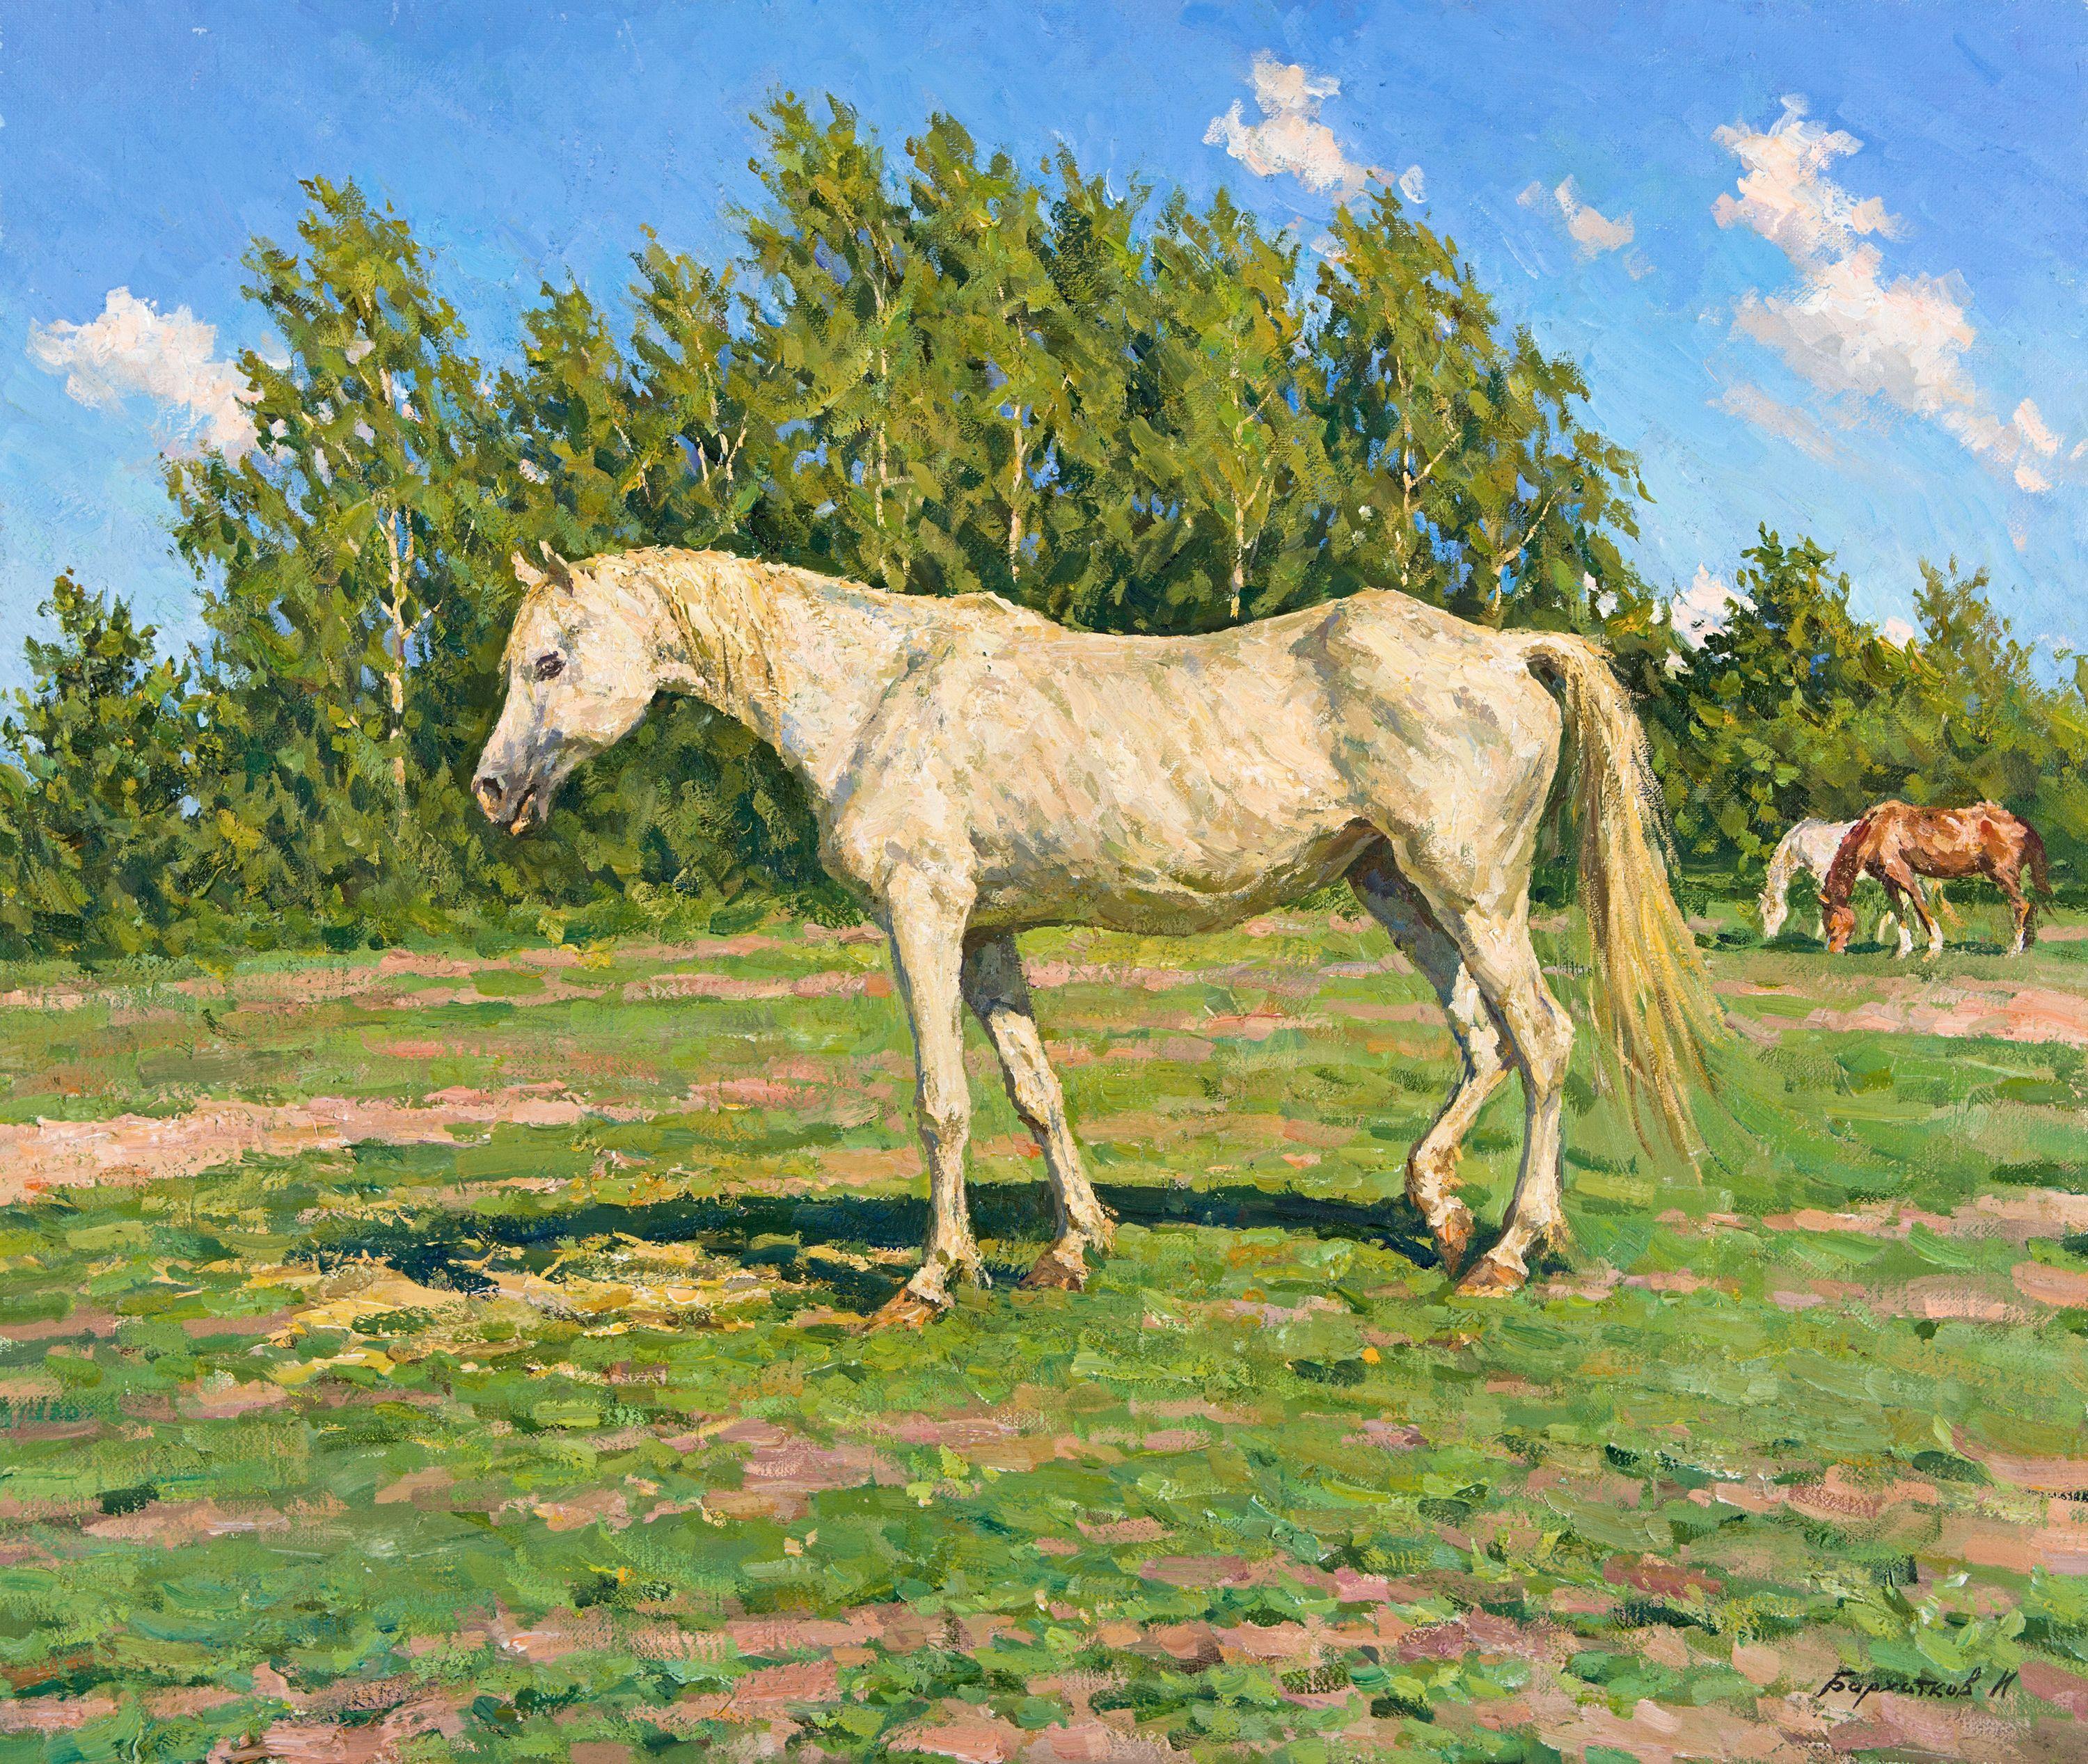 Title: The Old Horse;  Year created: 2016;  Medium and support: Oil on canvas;  Dimensions: h 55 cm Ã— w 65 cm Ã— d 2.5 cm. :: Painting :: Realism :: This piece comes with an official certificate of authenticity signed by the artist :: Ready to